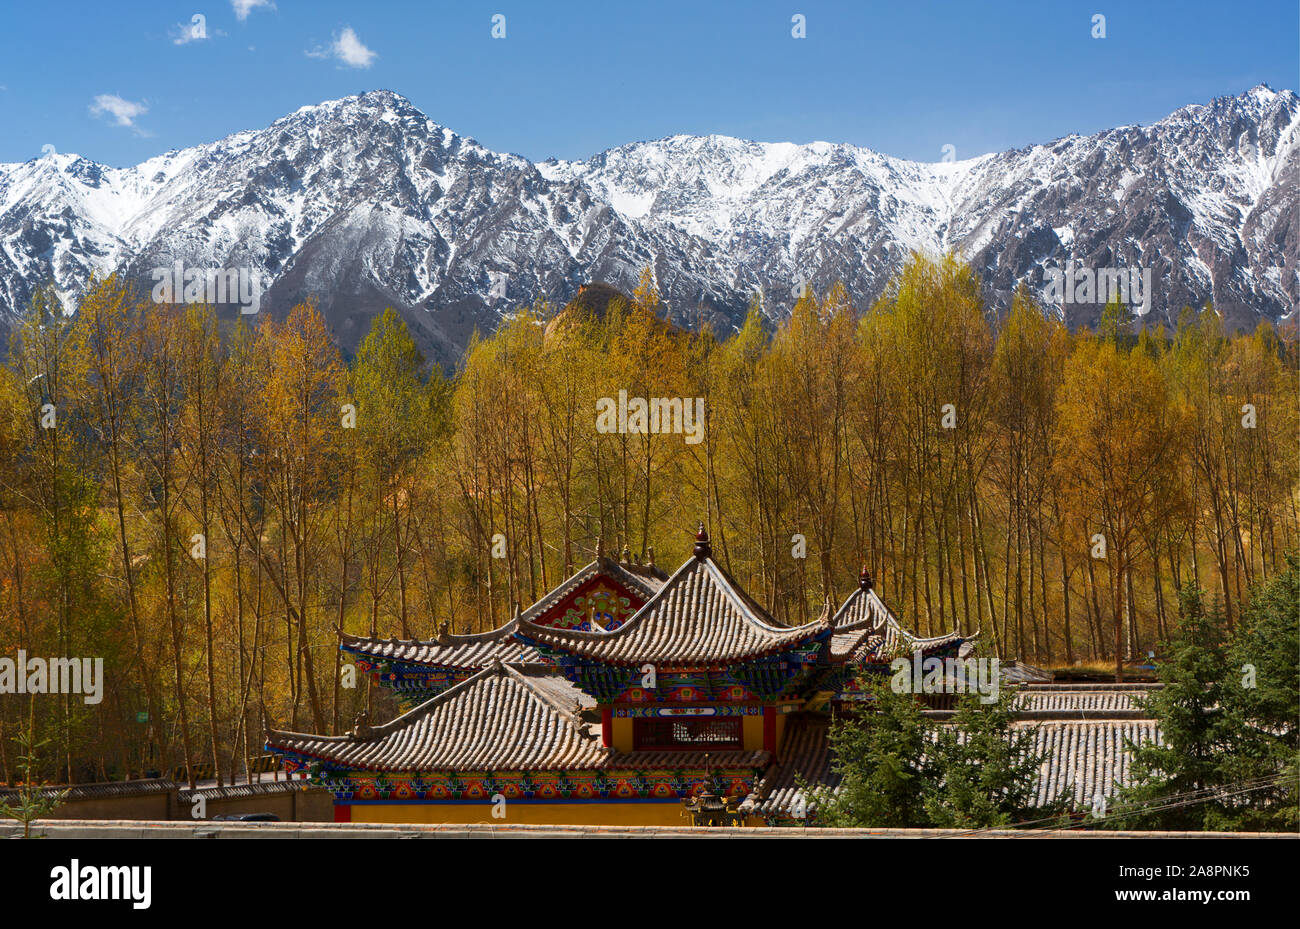 The buddhist monastery at Mati Si nested below the snowcapped Qilian Mountains, Gansu, China Stock Photo